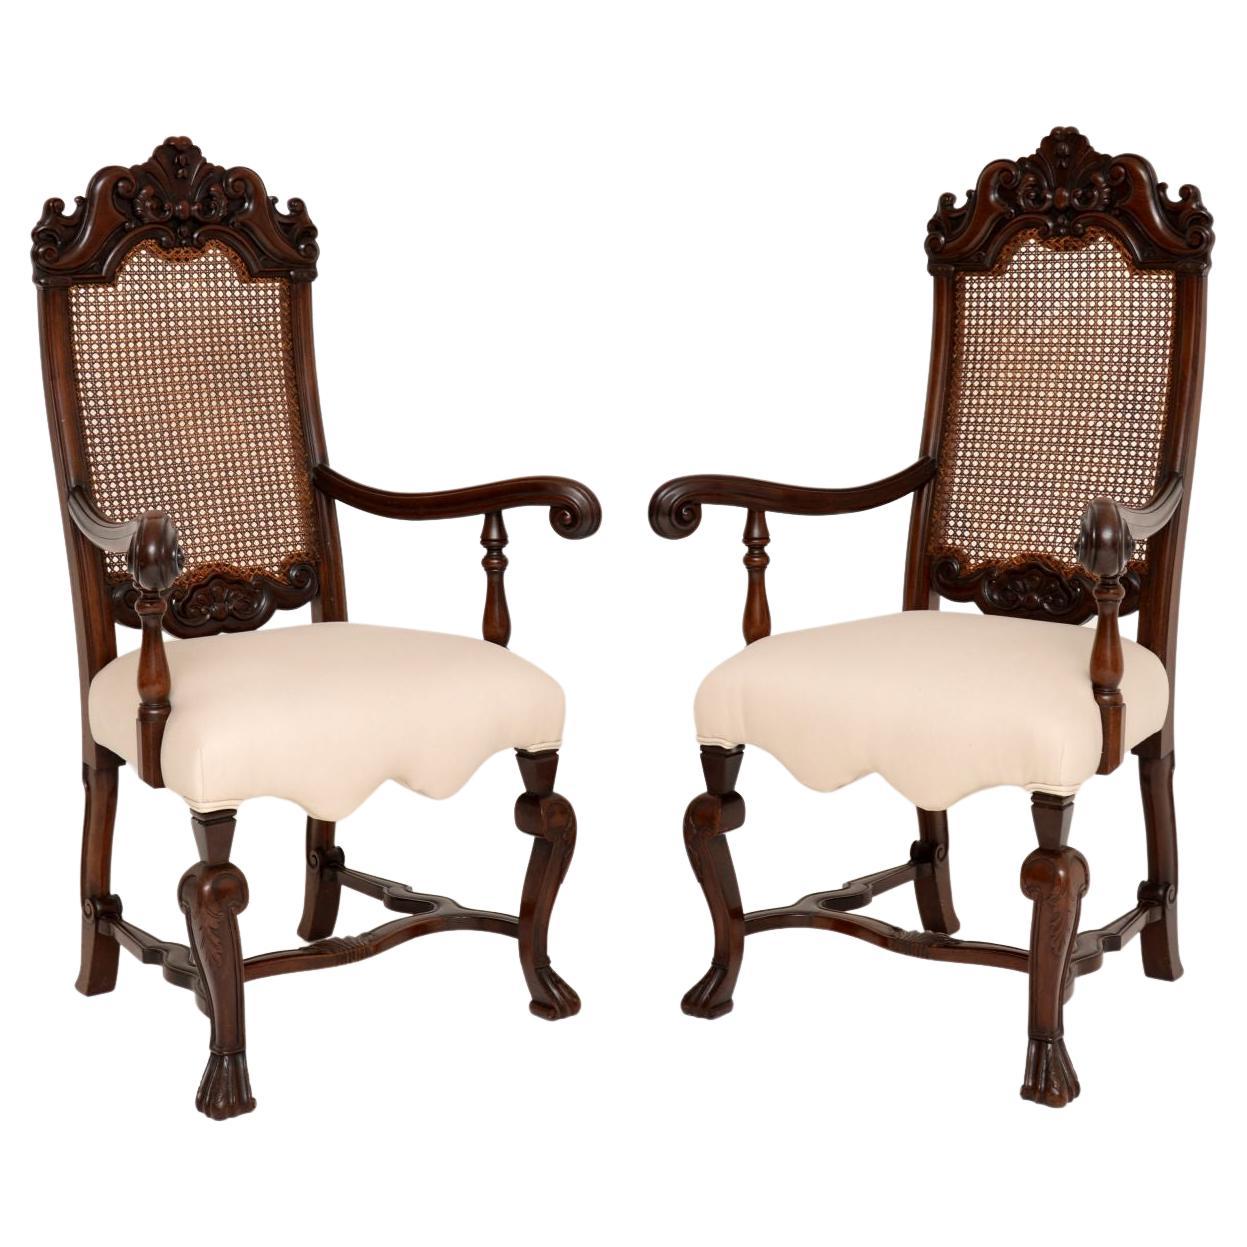 Pair of Antique Victorian Carved Walnut Armchairs